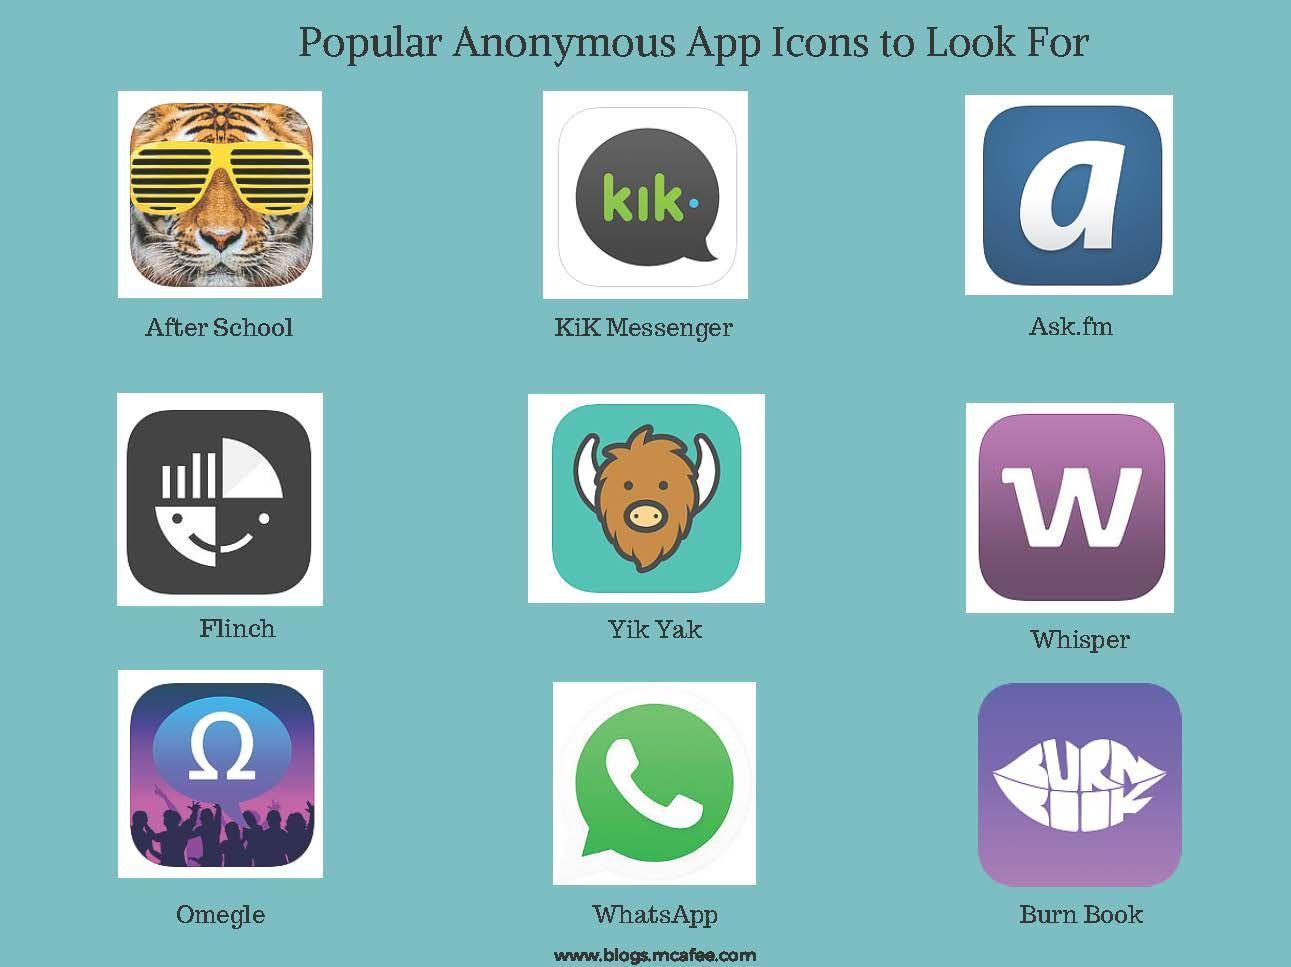 Kik Messenger App Logo - Anonymous App 'After School' Gaining Popularity with Teens. McAfee